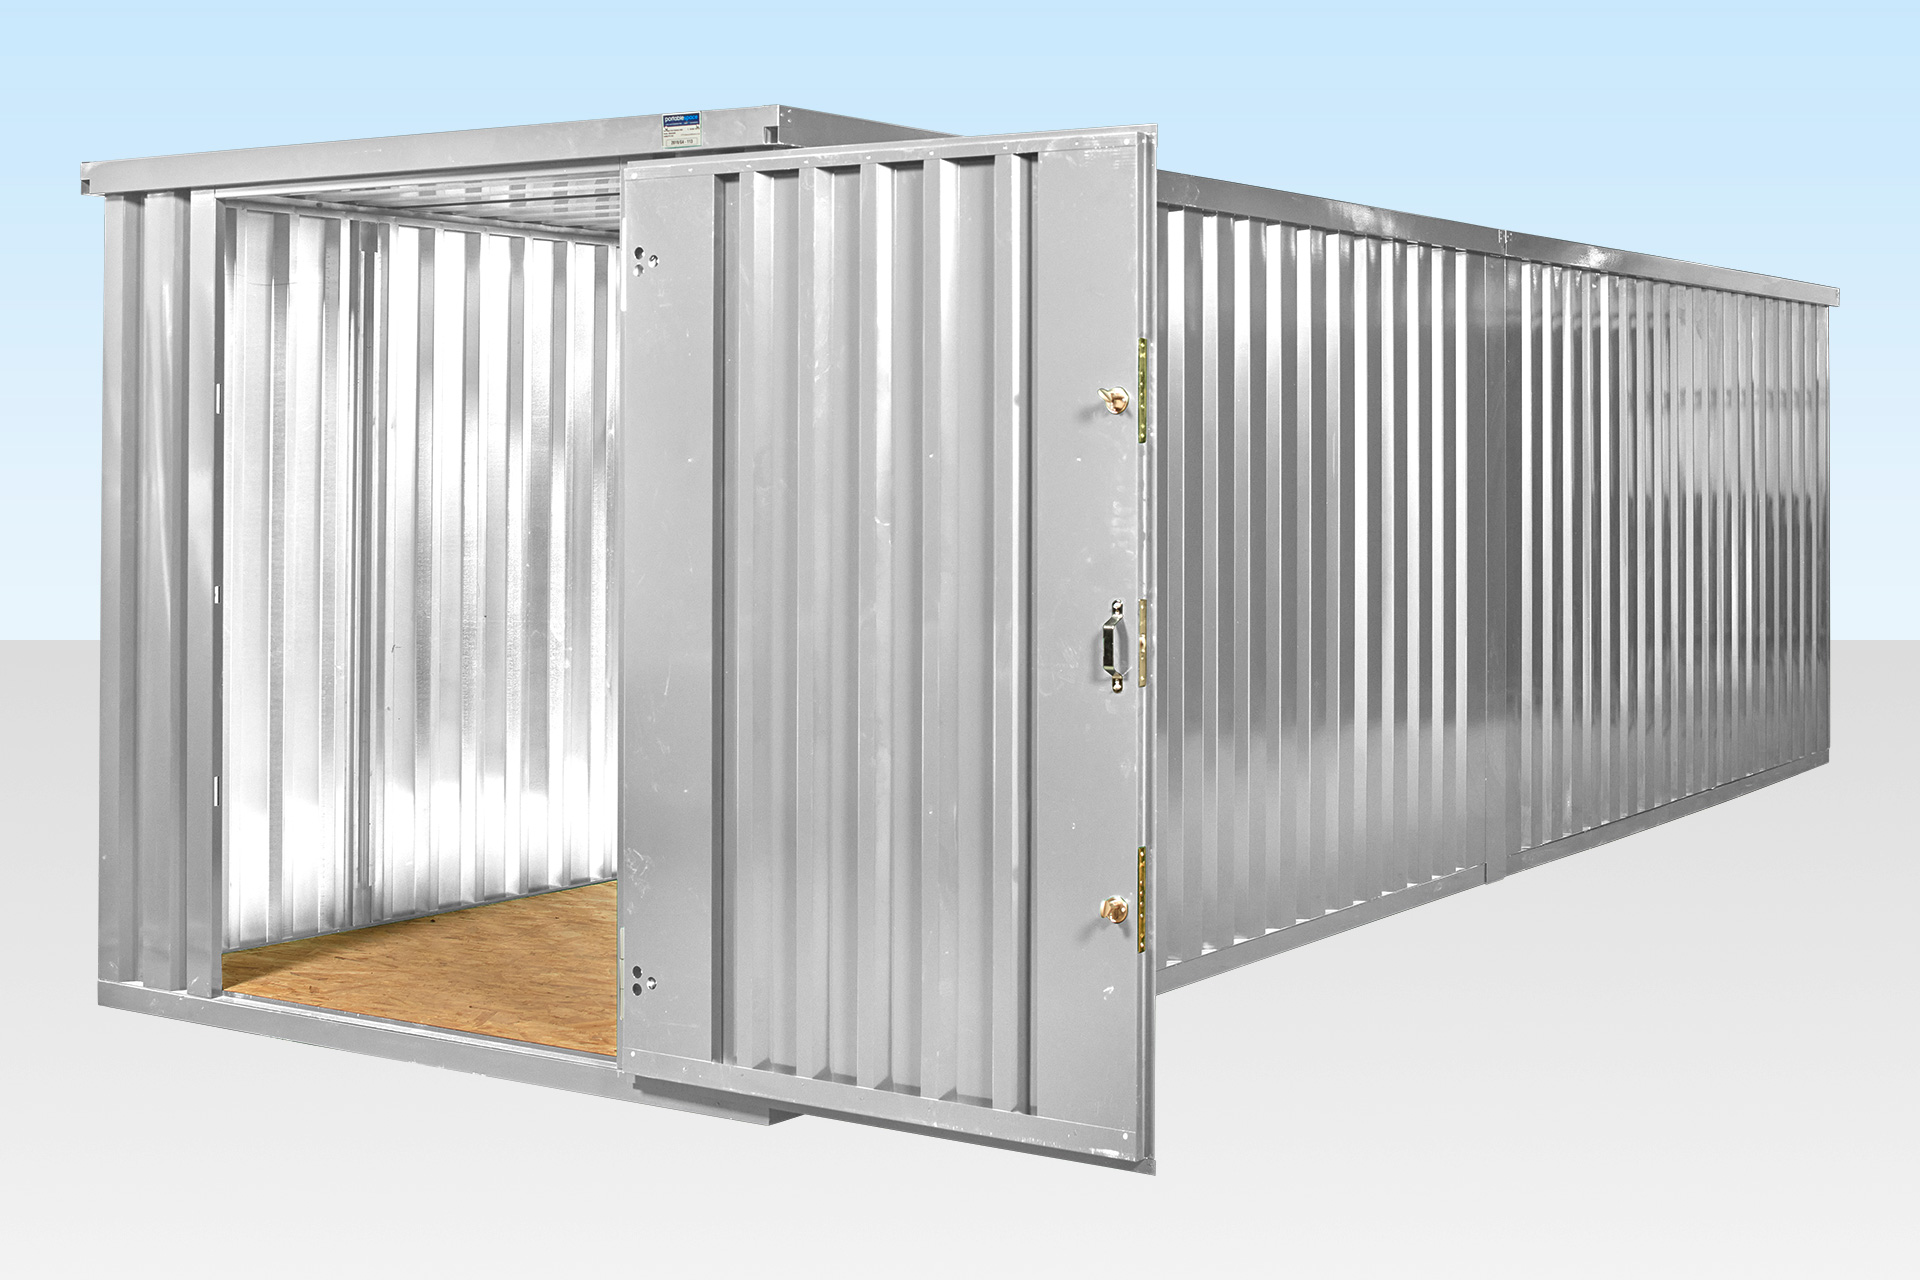 BUY 8M X 2.1M END LINKED FLAT PACKED CONTAINER BUNDLE (GALVANISED) AT WWW.HELLOCONTAINERS.COM